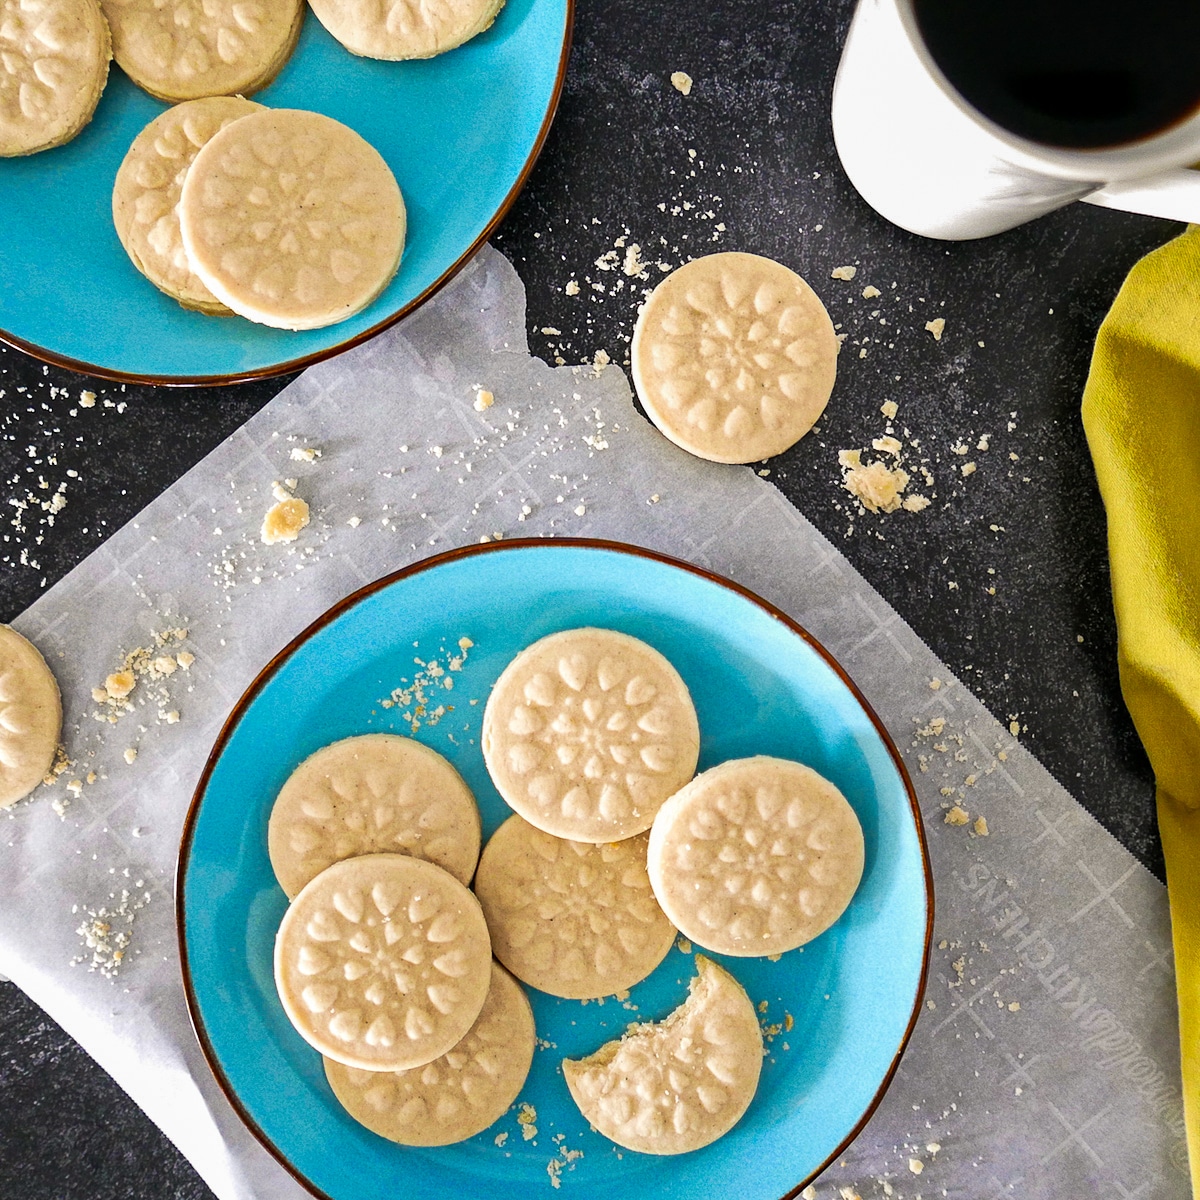 cardamom shortbread cookies arranged on two blue plates with a cup of coffee and cookie crumbs on table.